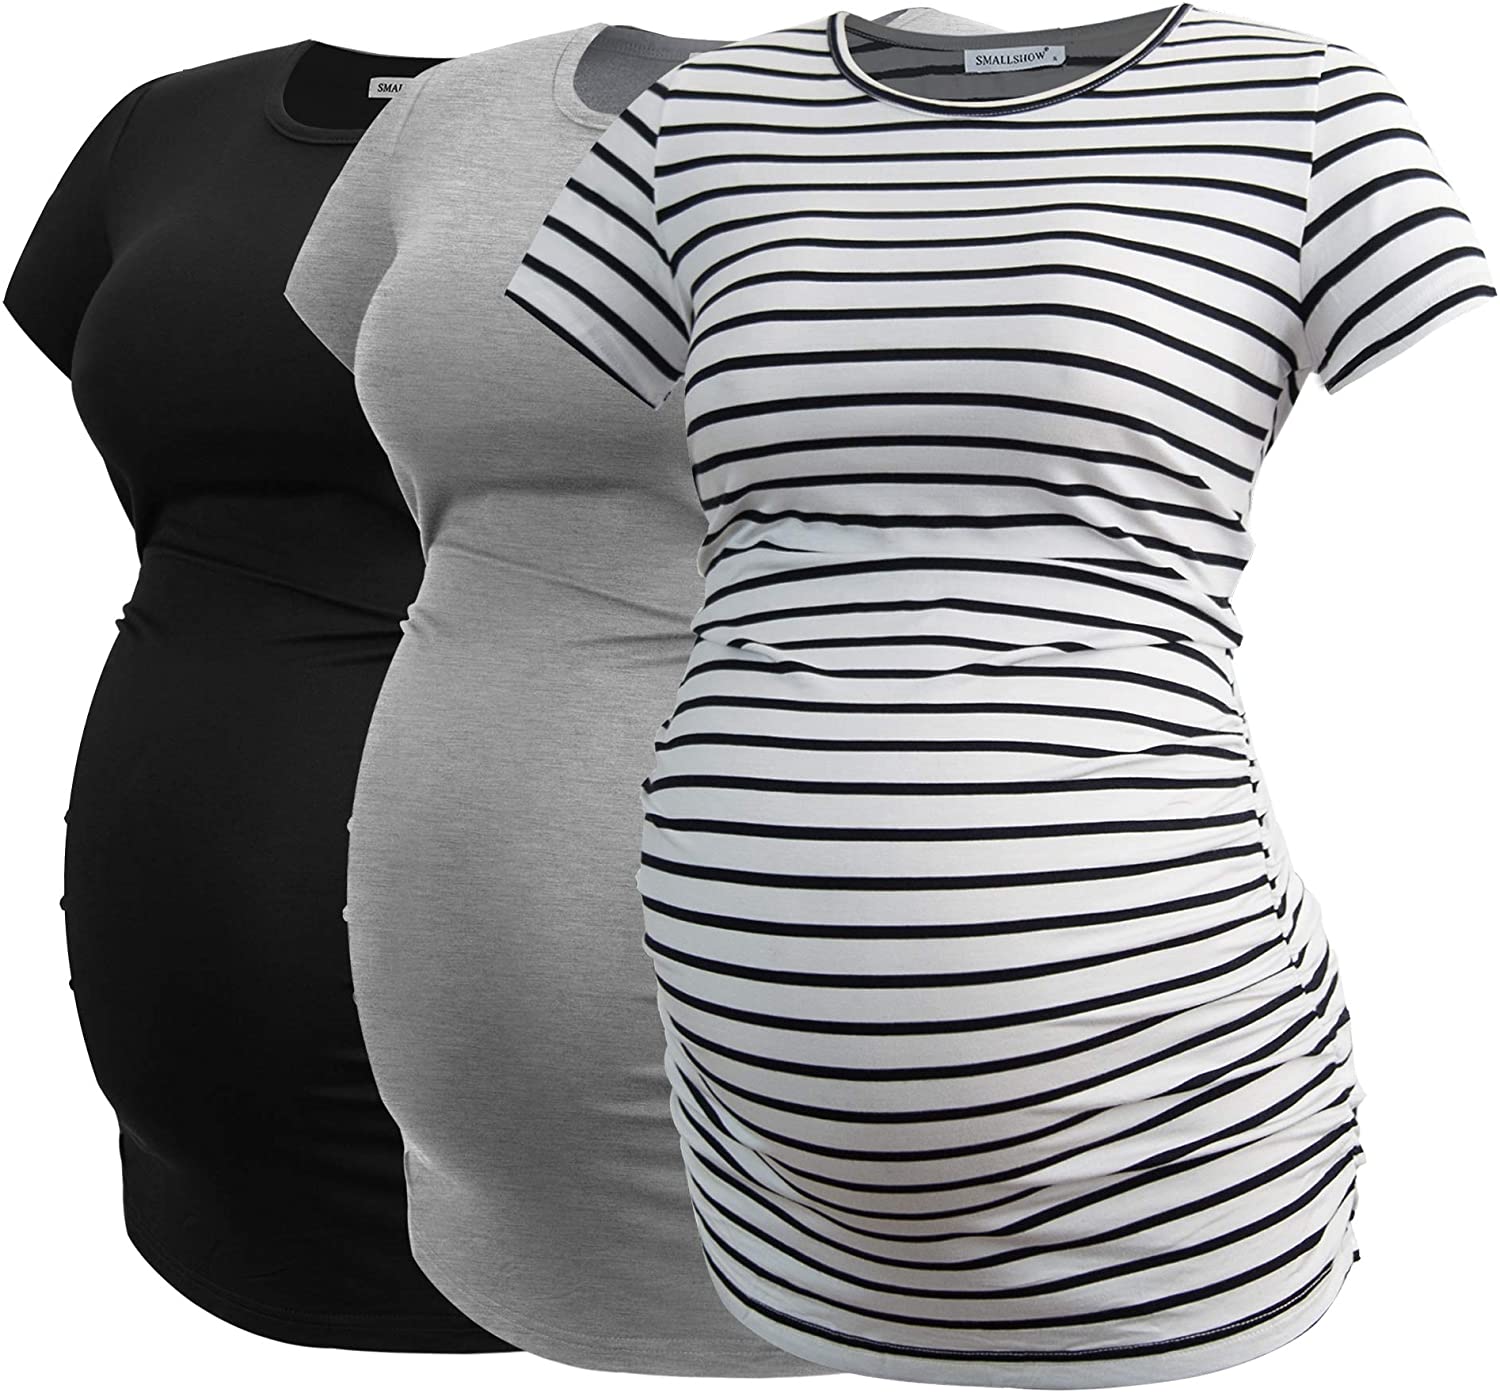 Smallshow Womens Long Sleeve Maternity Clothe Tops Side Ruched Pregnancy Shirt